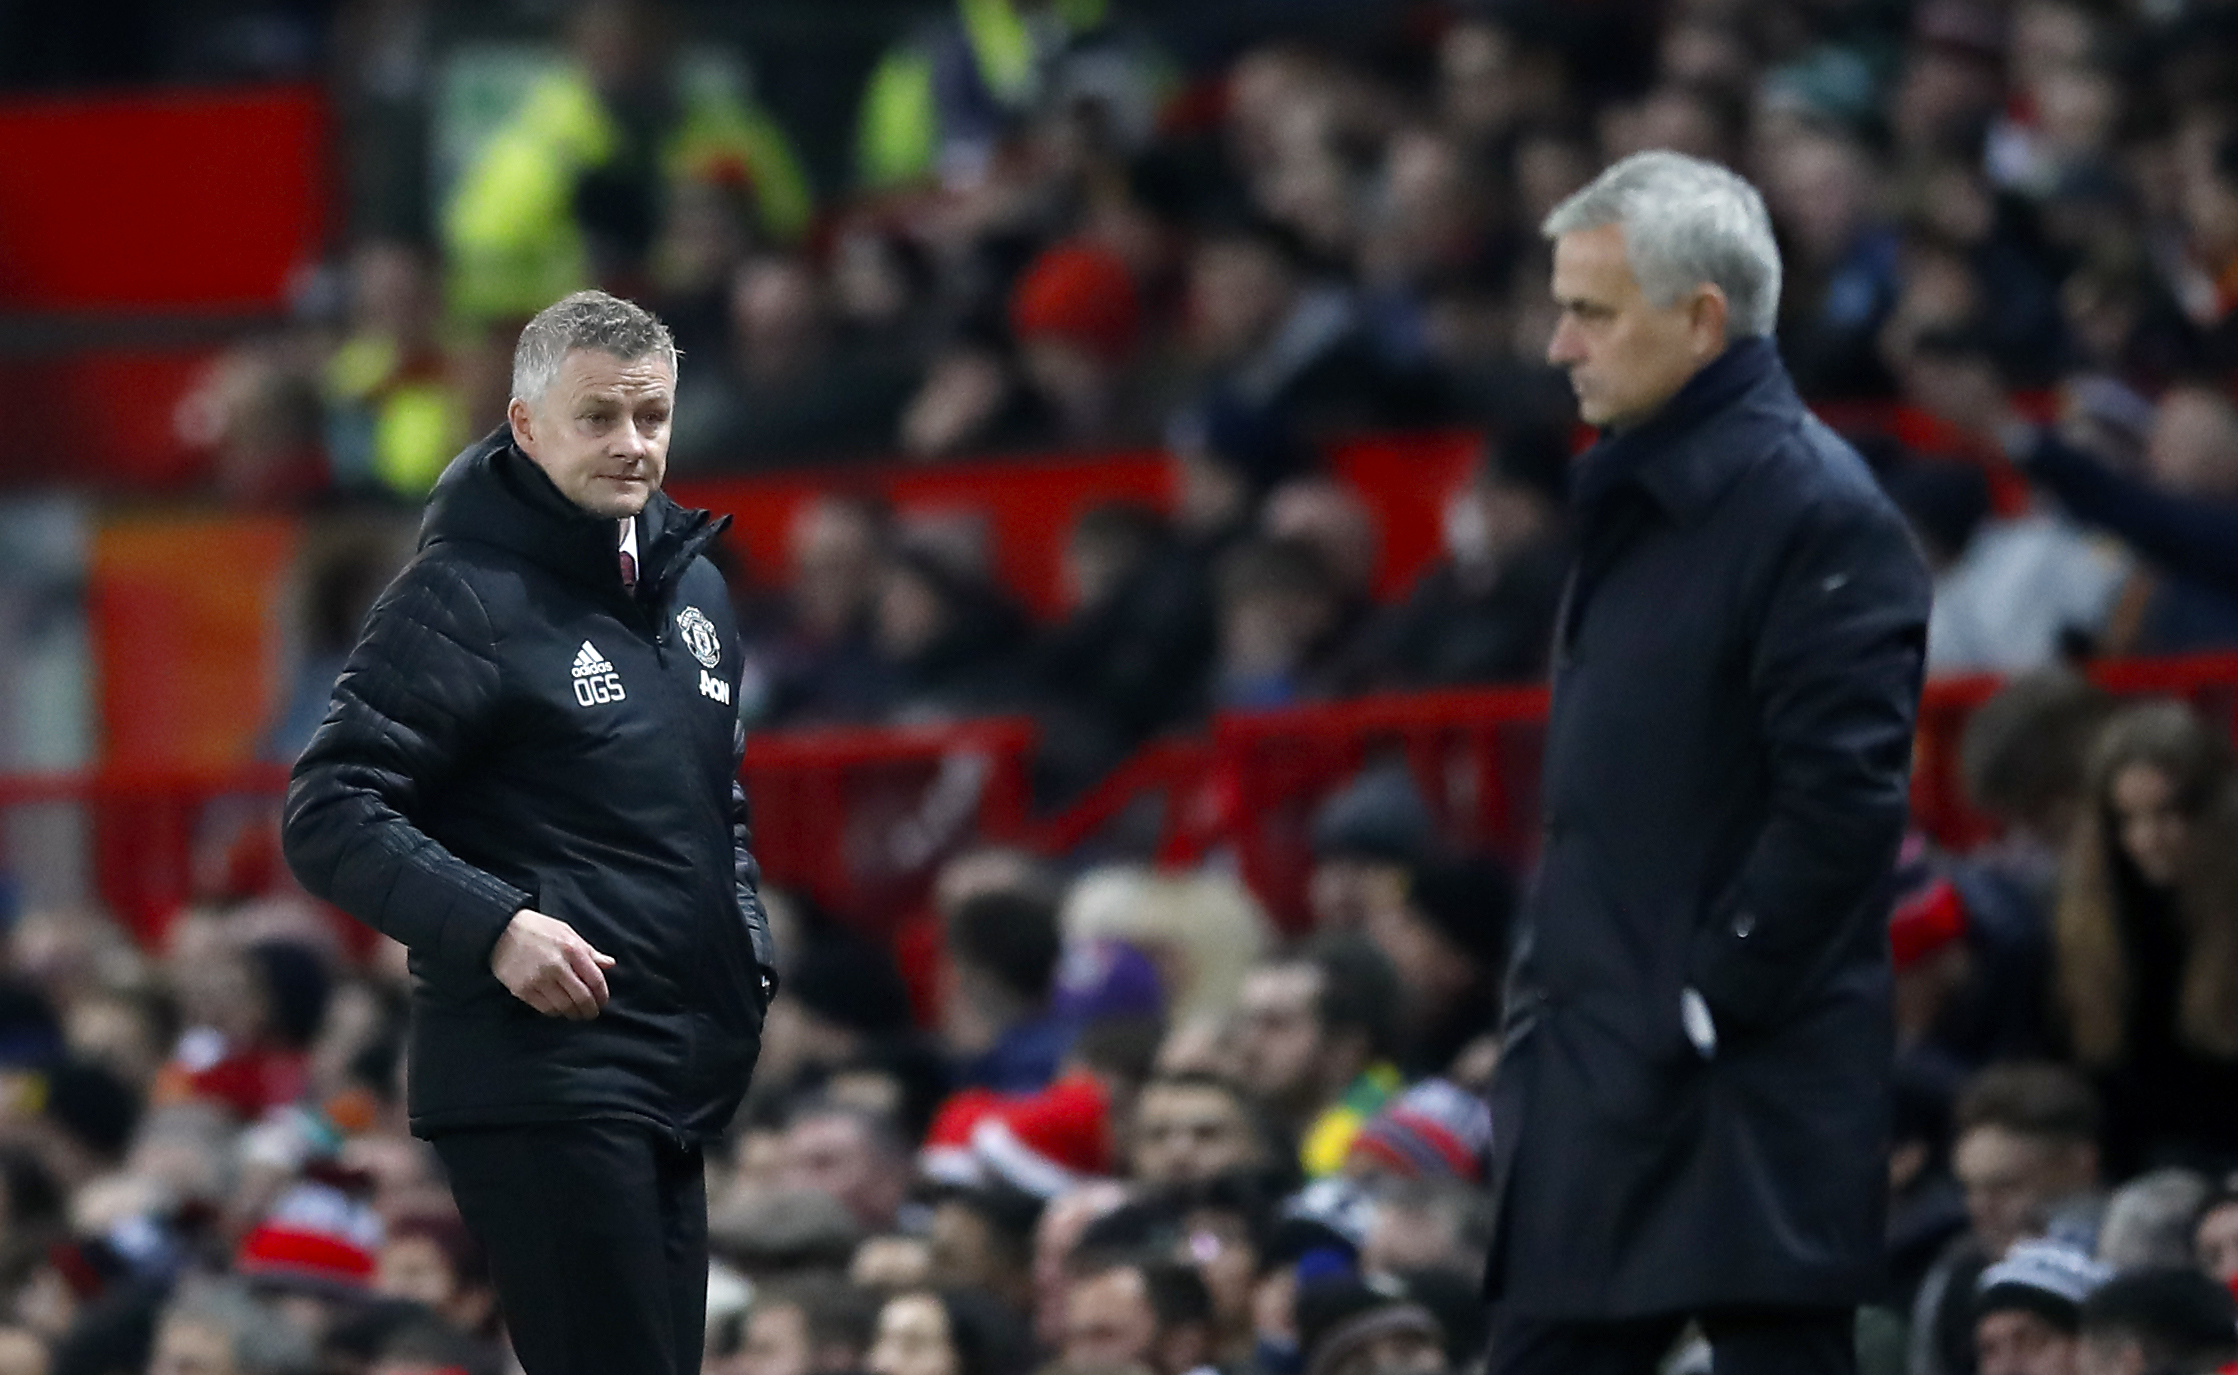 Mourinho and Solskjaer will meet on the opening Friday night of Project Restart. Image: PA Images